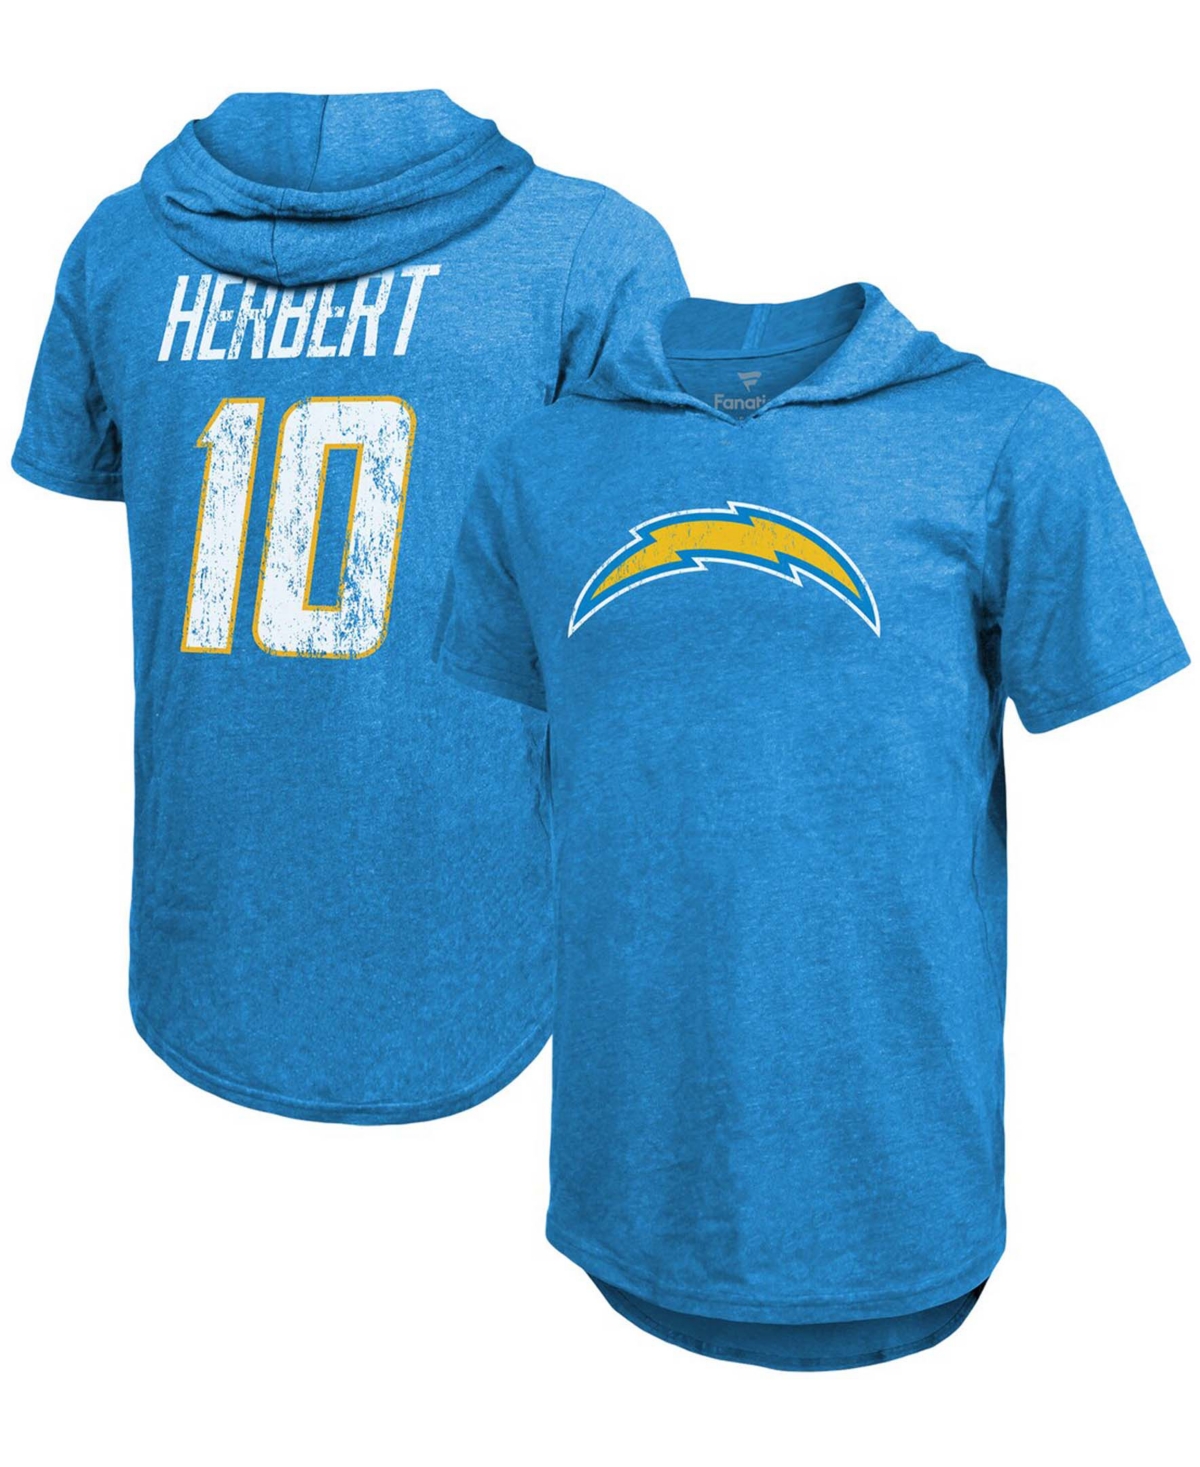 Men's Fanatics Justin Herbert Powder Blue Los Angeles Chargers Player Name and Number Tri-Blend Hoodie T-shirt - Powder Blue